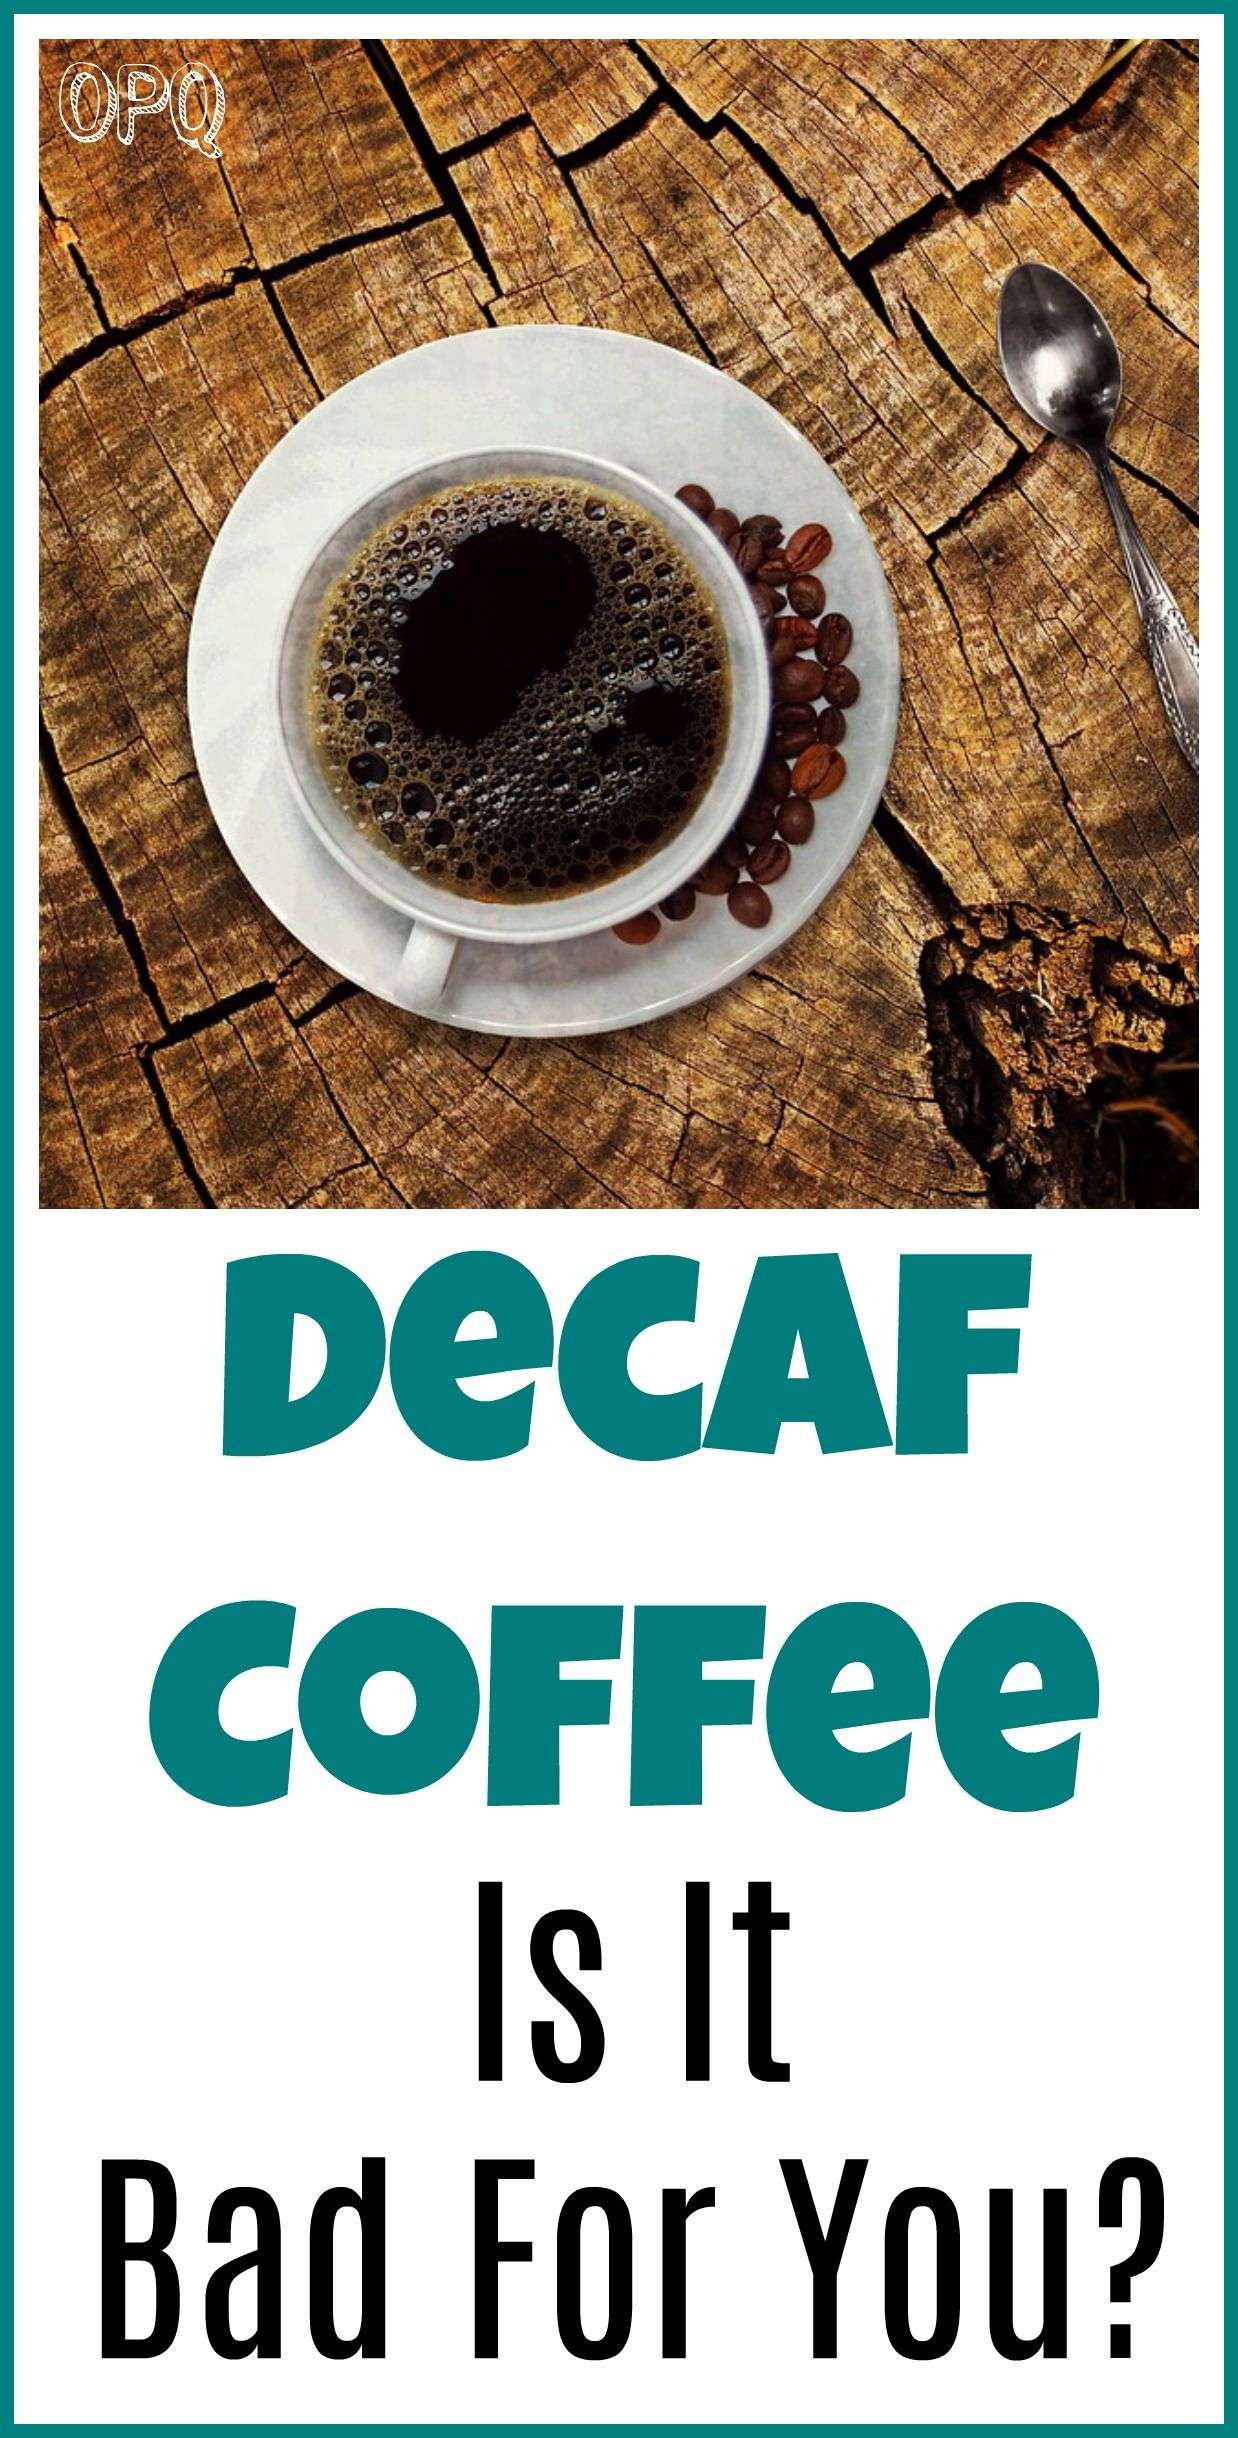 Is Decaffeinated Coffee Bad For You?